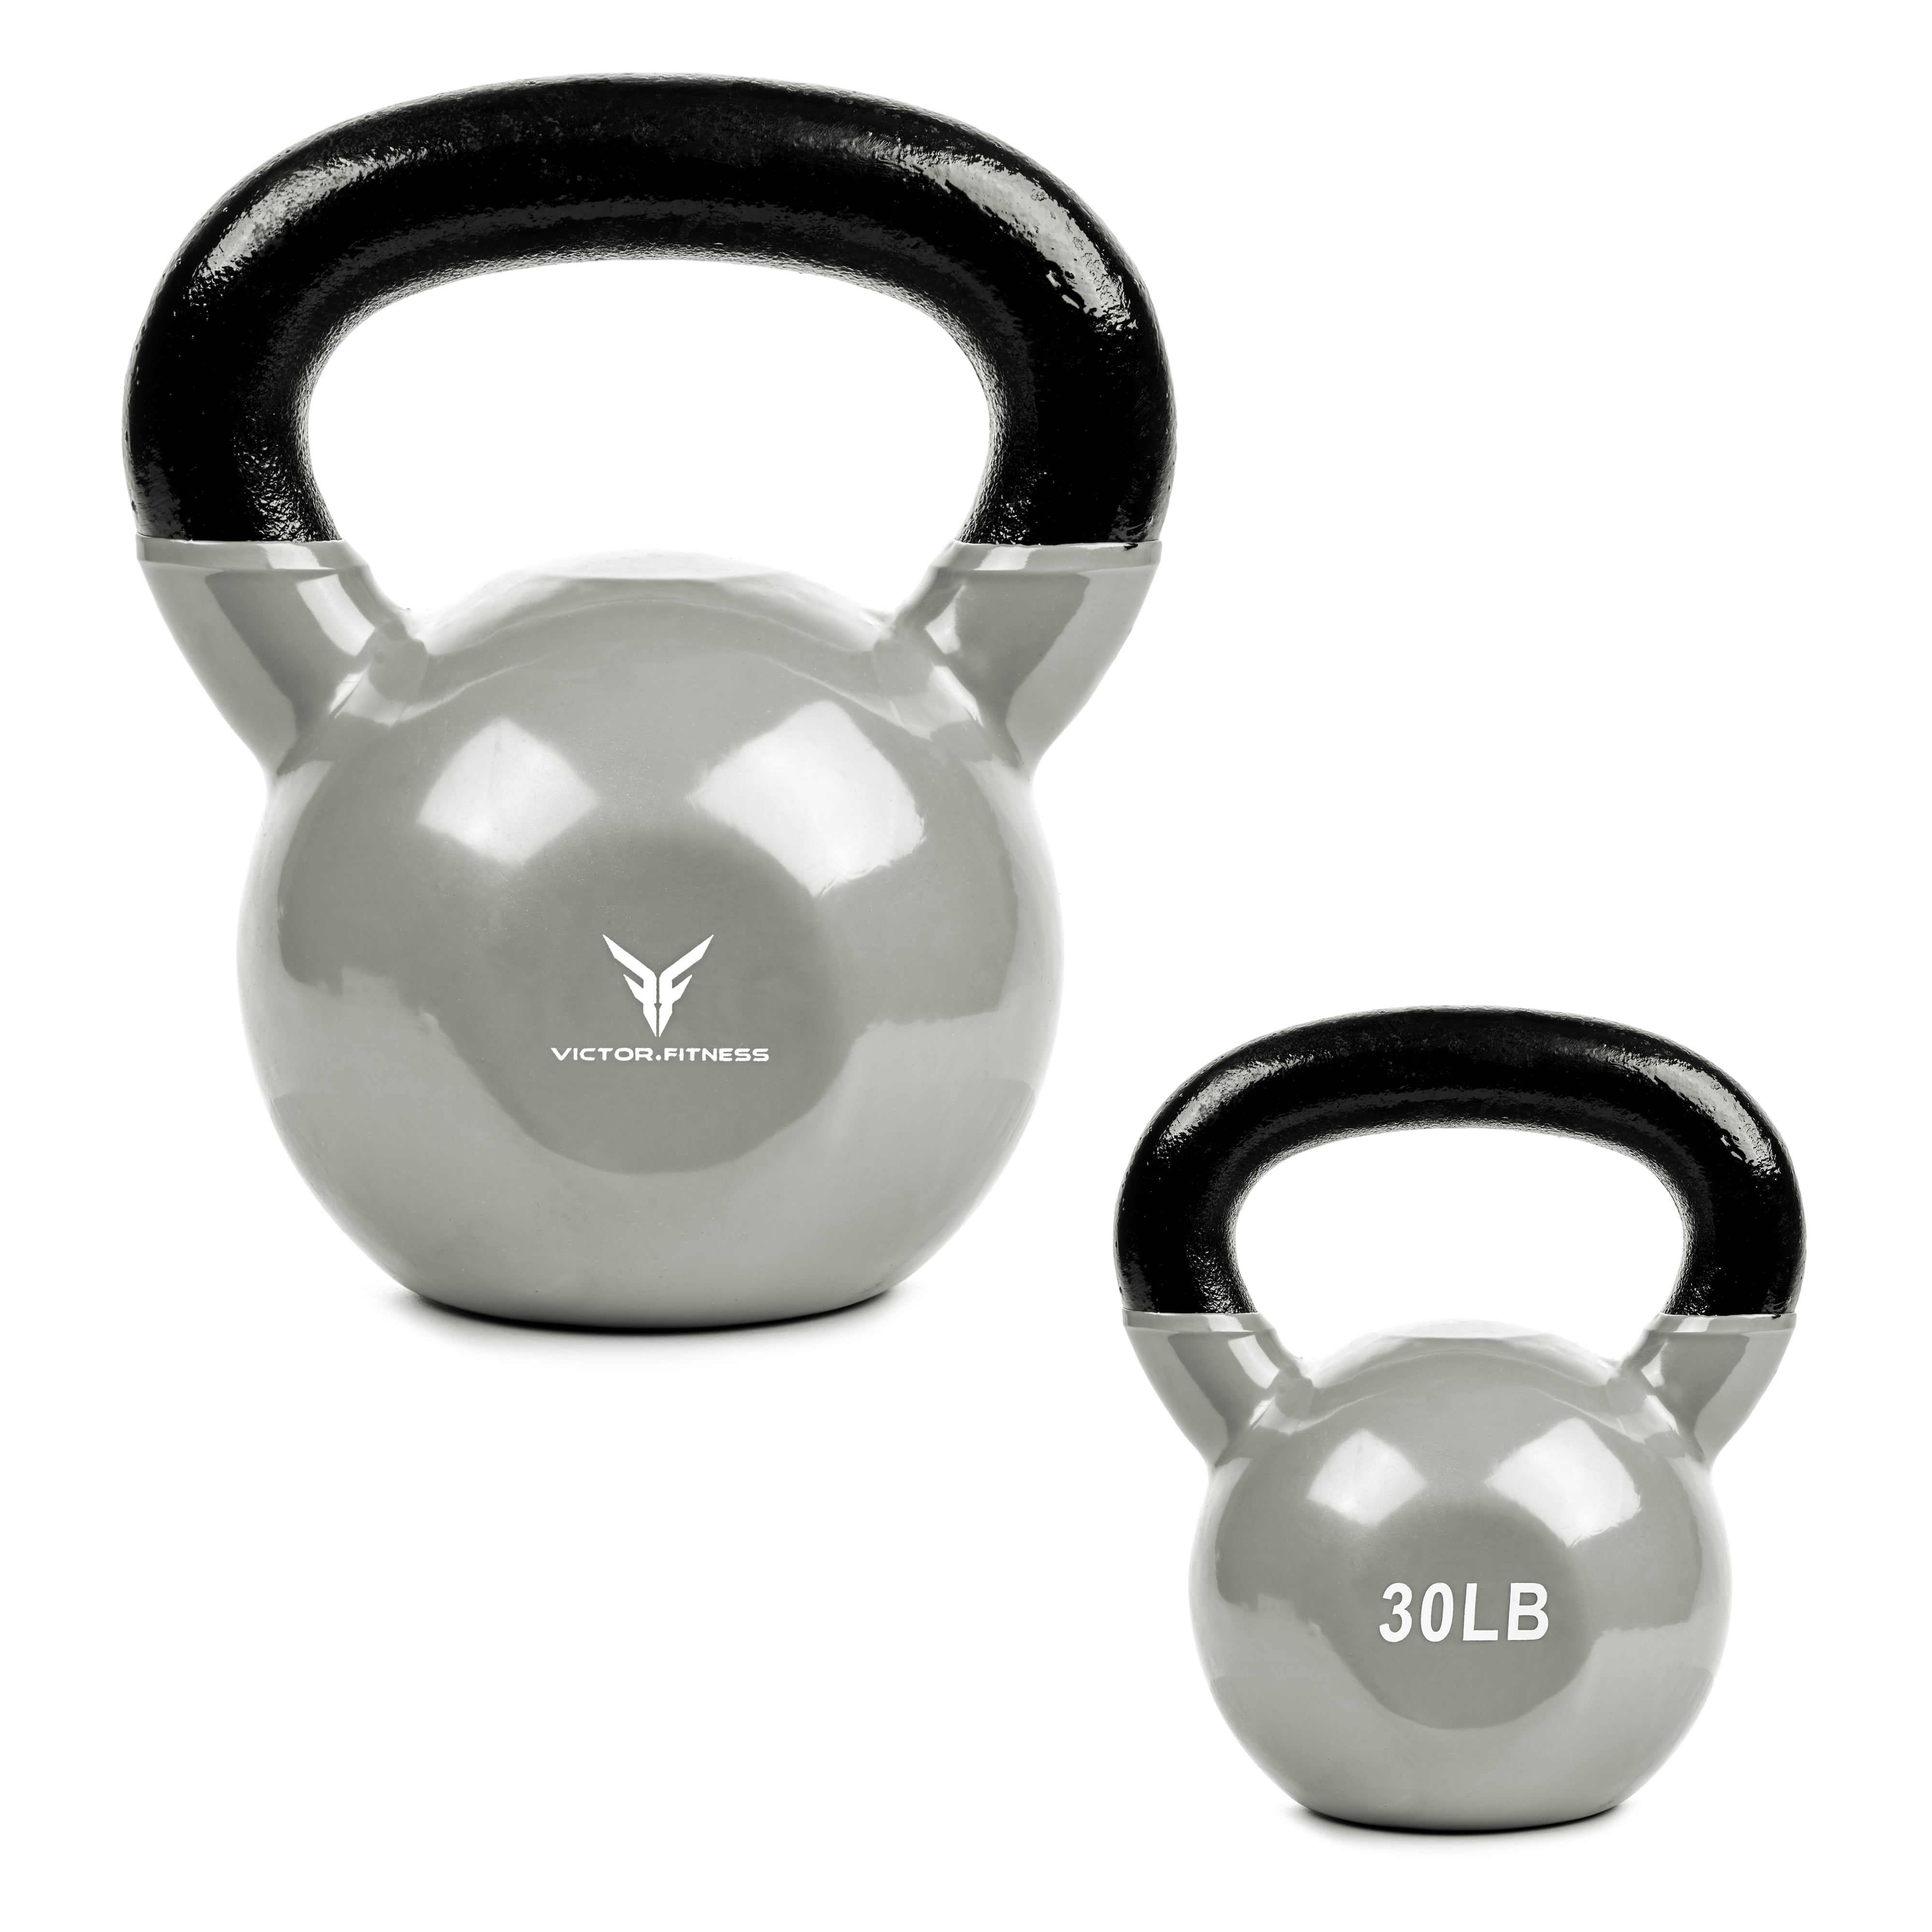 35 LBS New Free Shipping PRCTZ Solid Cast Iron Kettlebell 